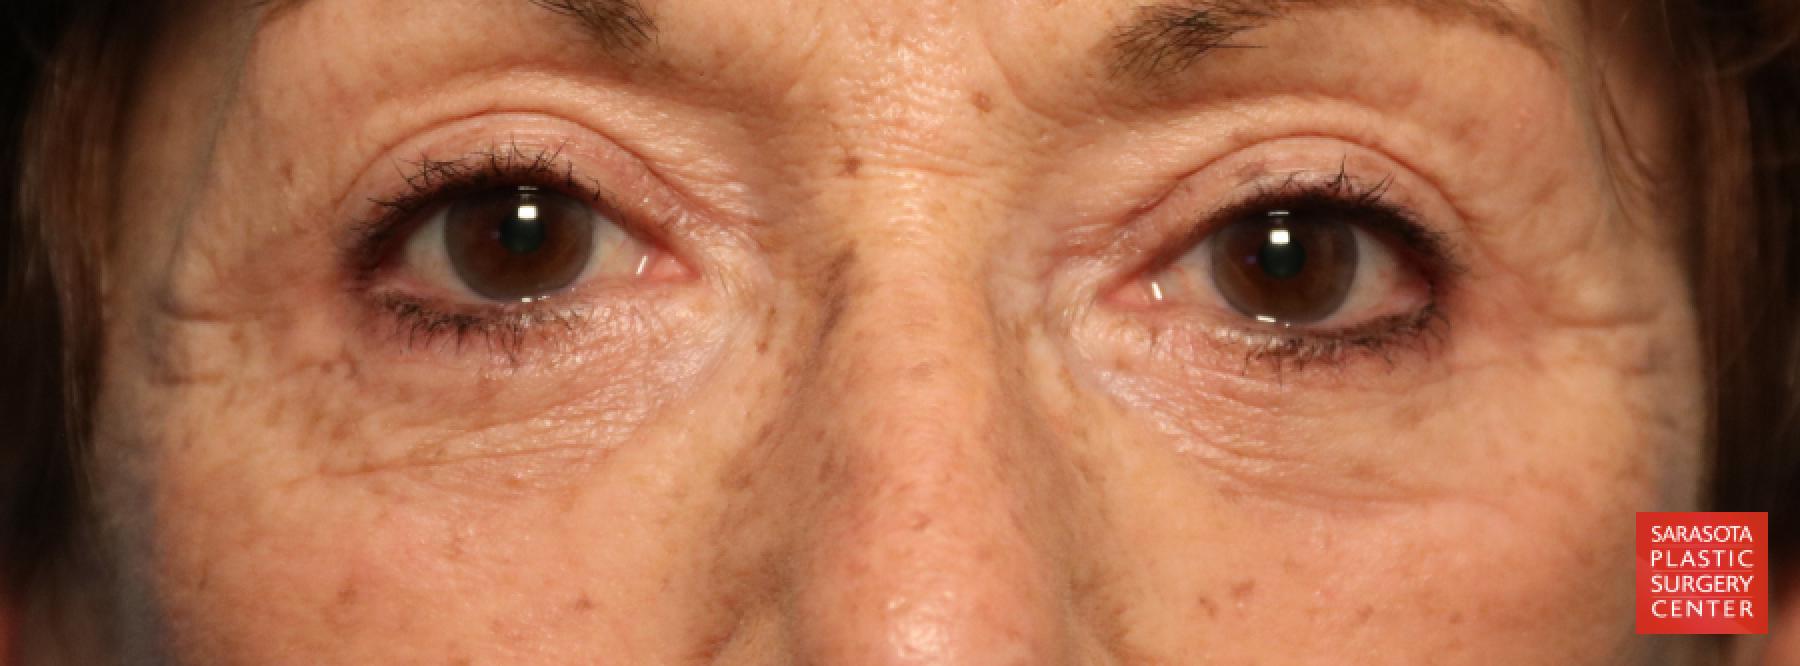 Eyelid Lift: Patient 7 - After 1